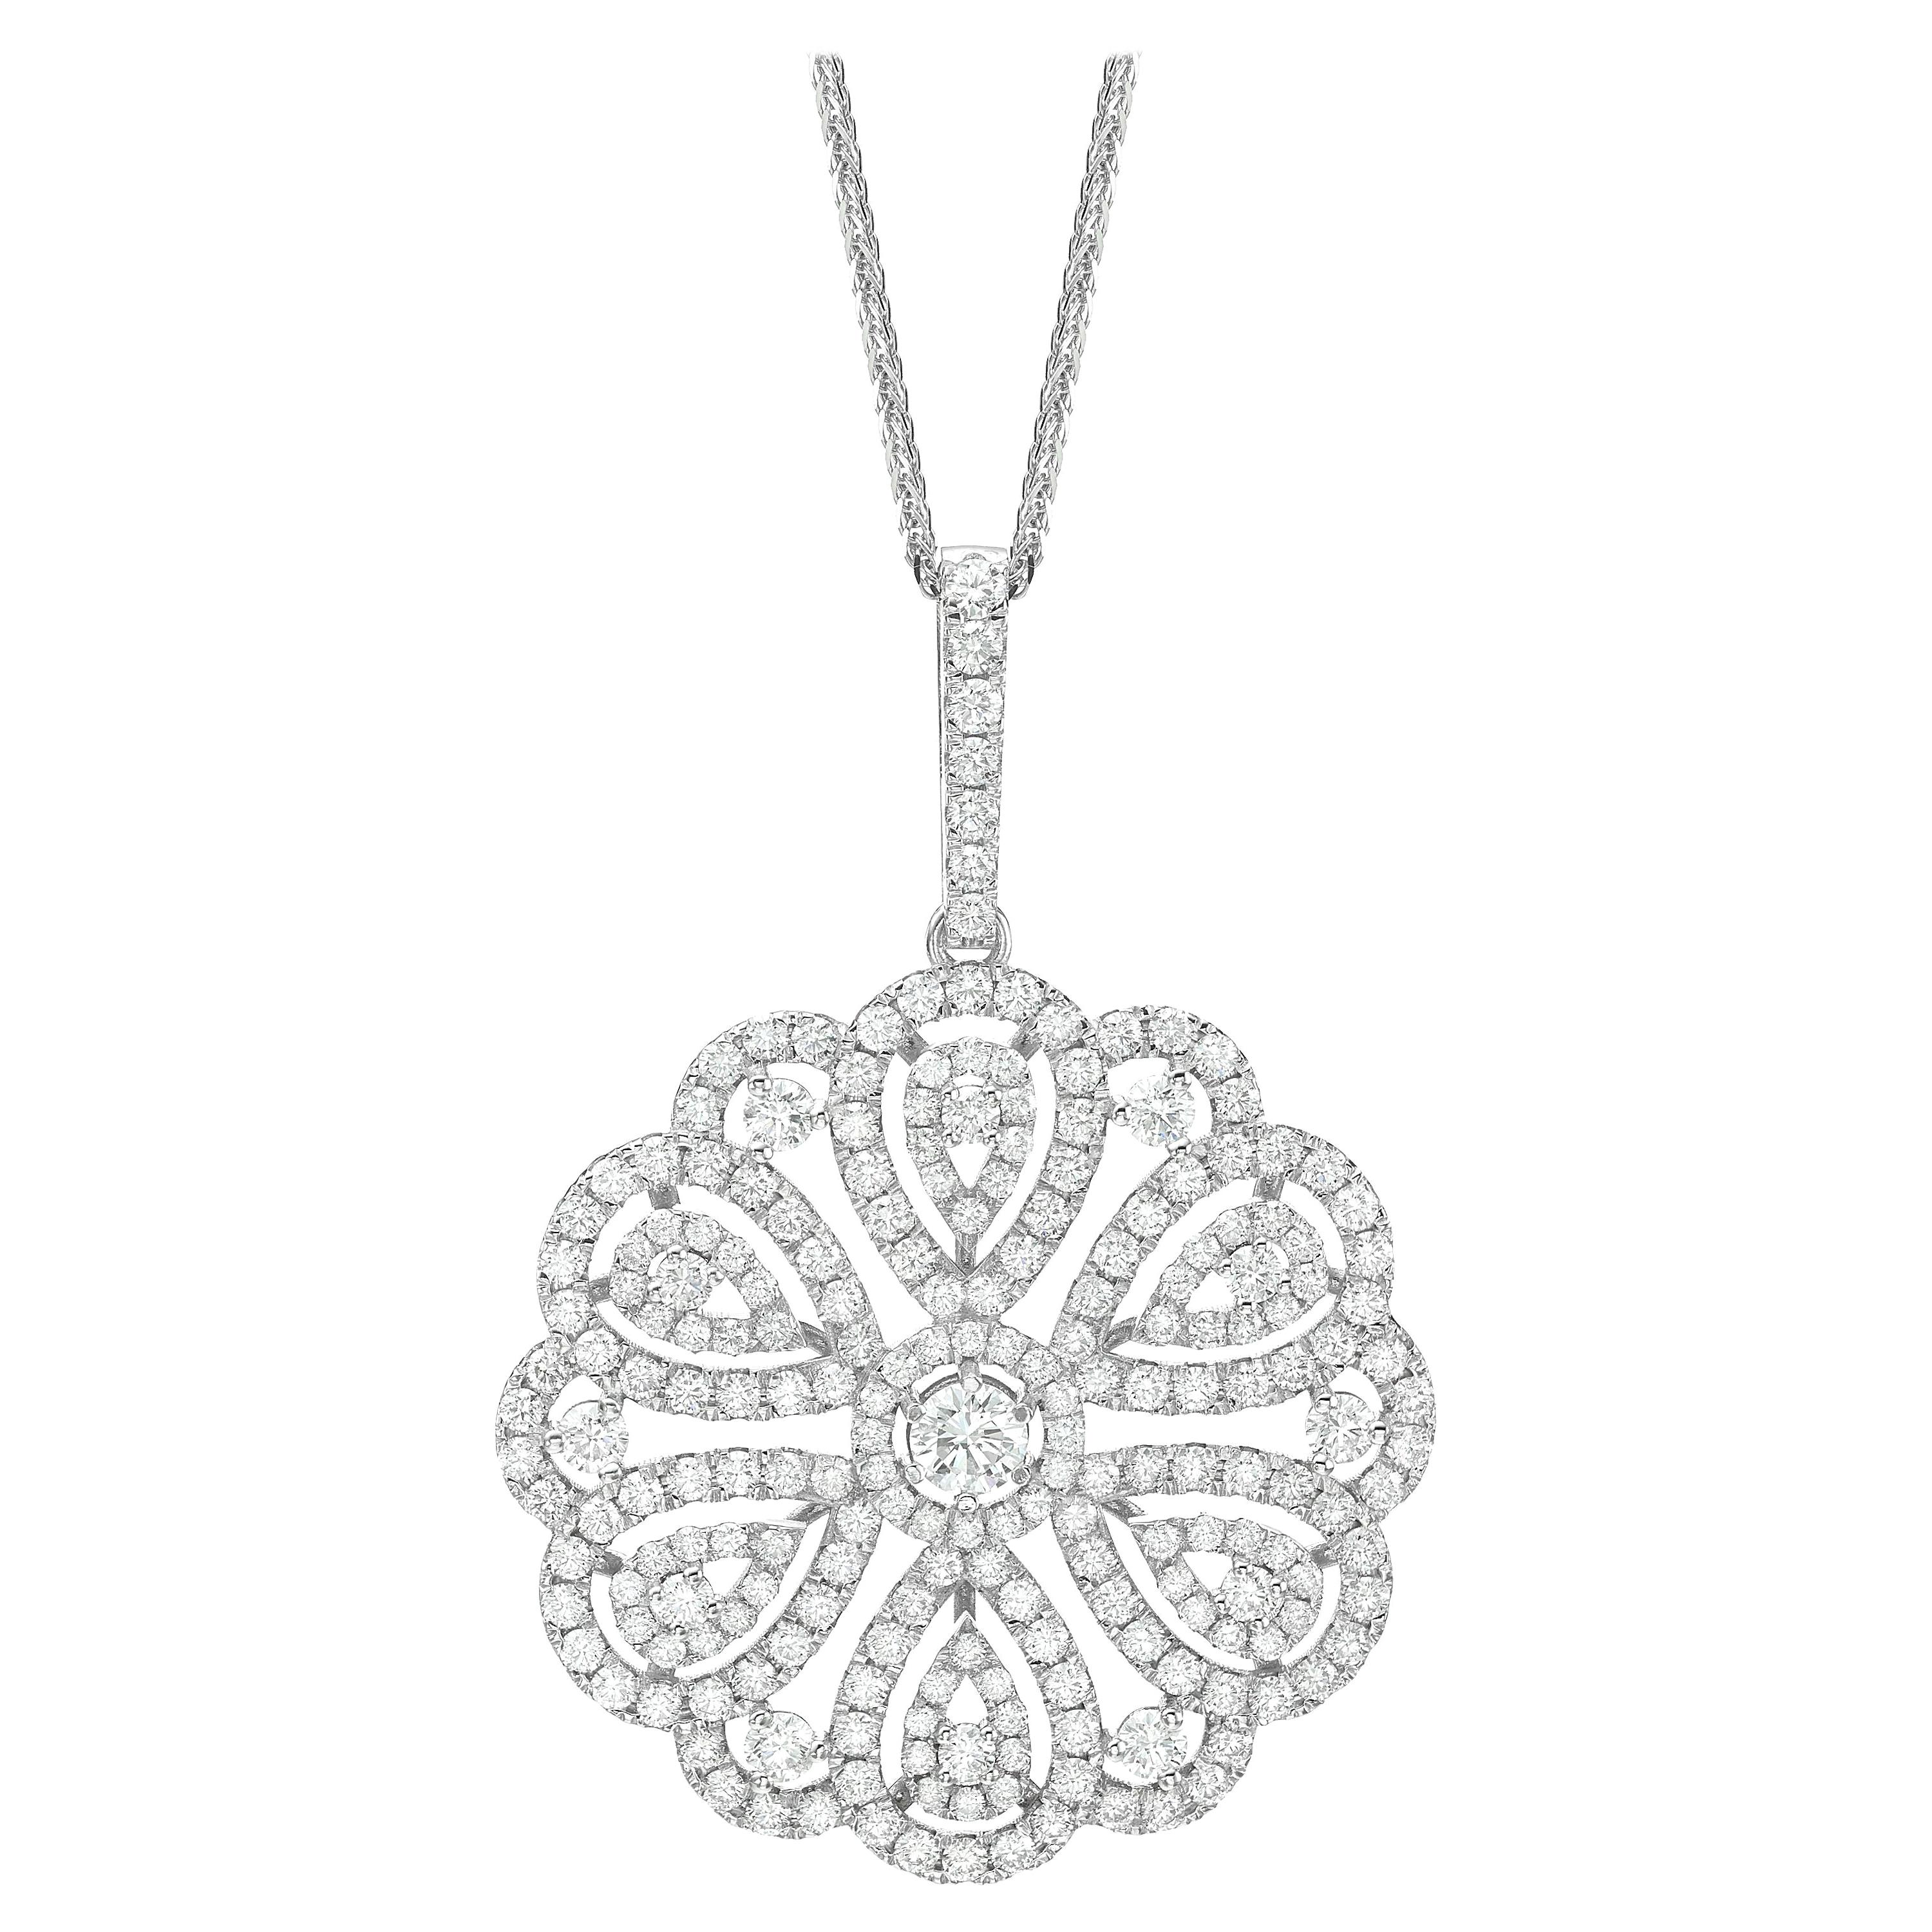 7.52 Carat Round Diamond Cluster Pendant with 18K Gold  Necklace For Sale